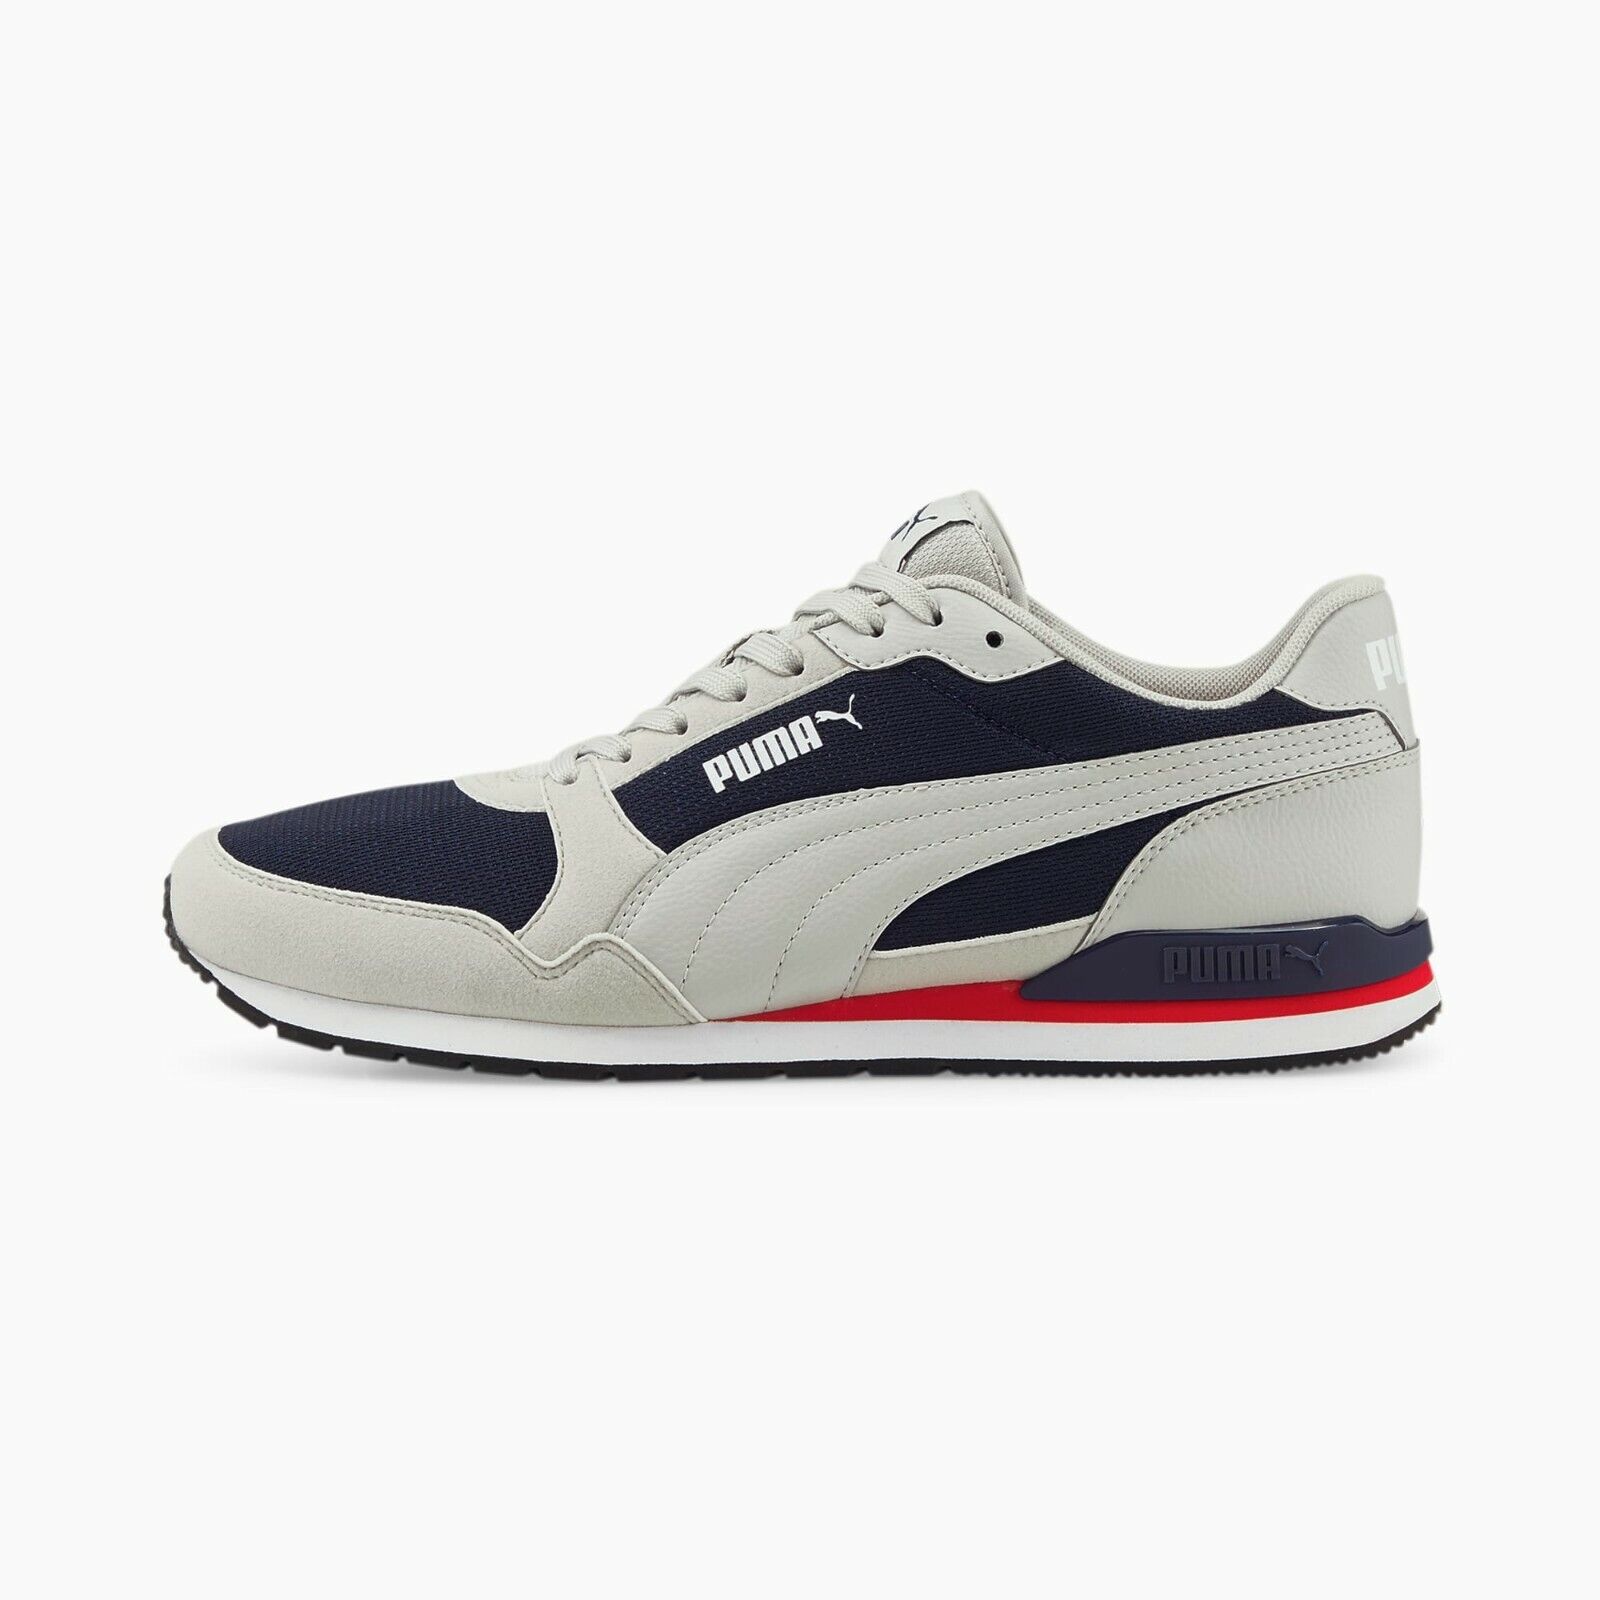 Puma ST Runner v3 Mesh Shoes LifeStyle Sneakers Gray Violet 384640_05 US  4-12